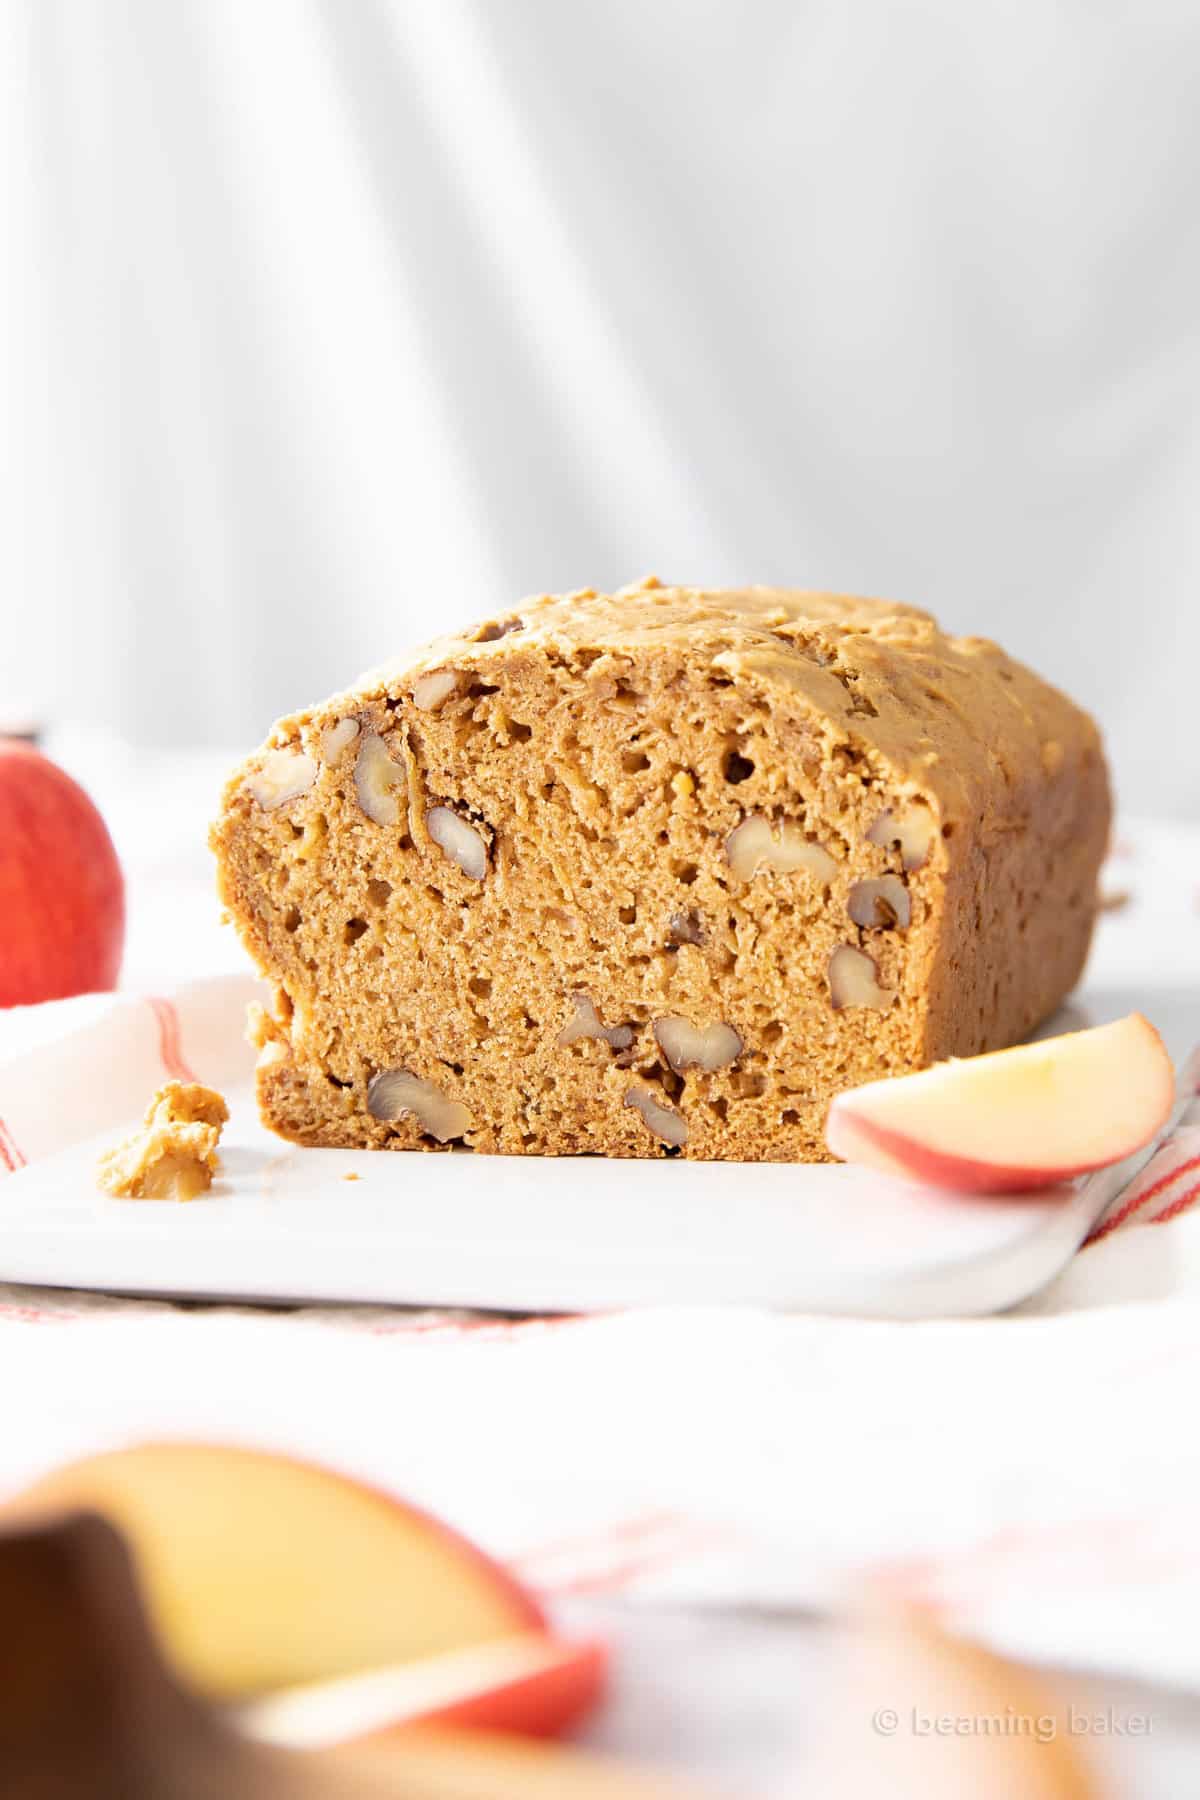 Photo of the inside of a loaf of this apple bread recipe to show moistness and texture